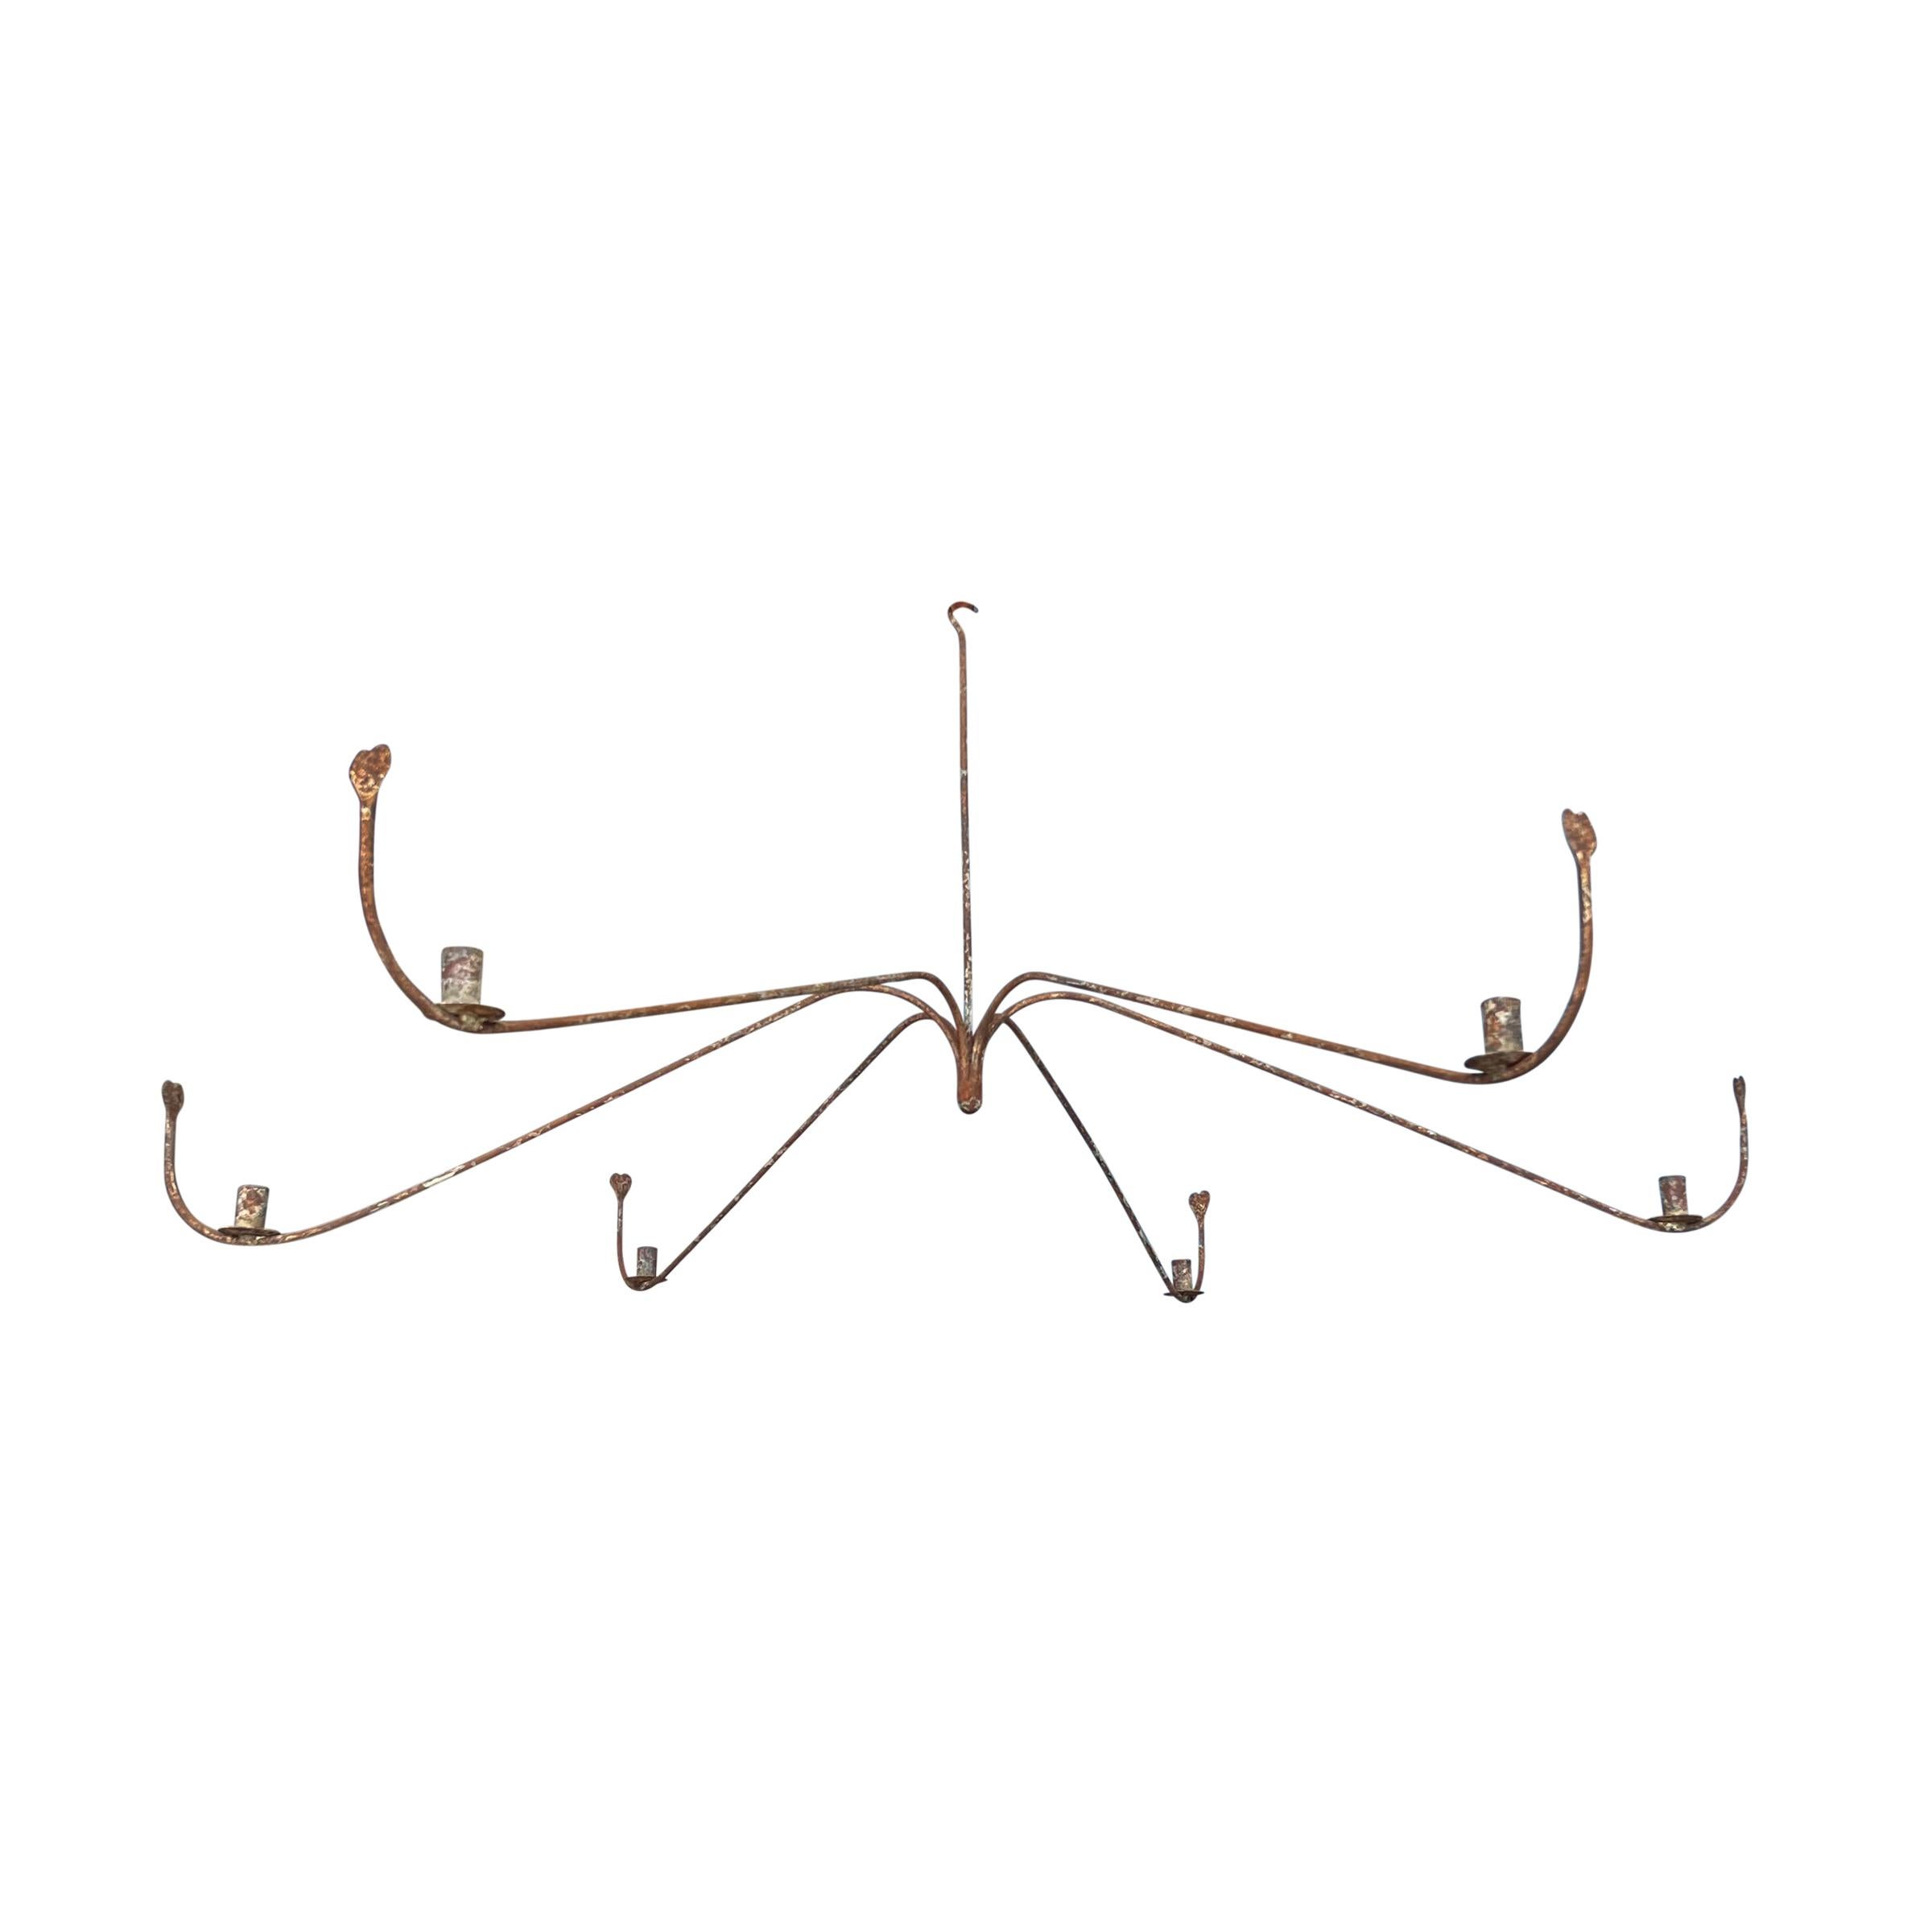 19th Century American Six-Arm Wrought-Iron Chandelier 3